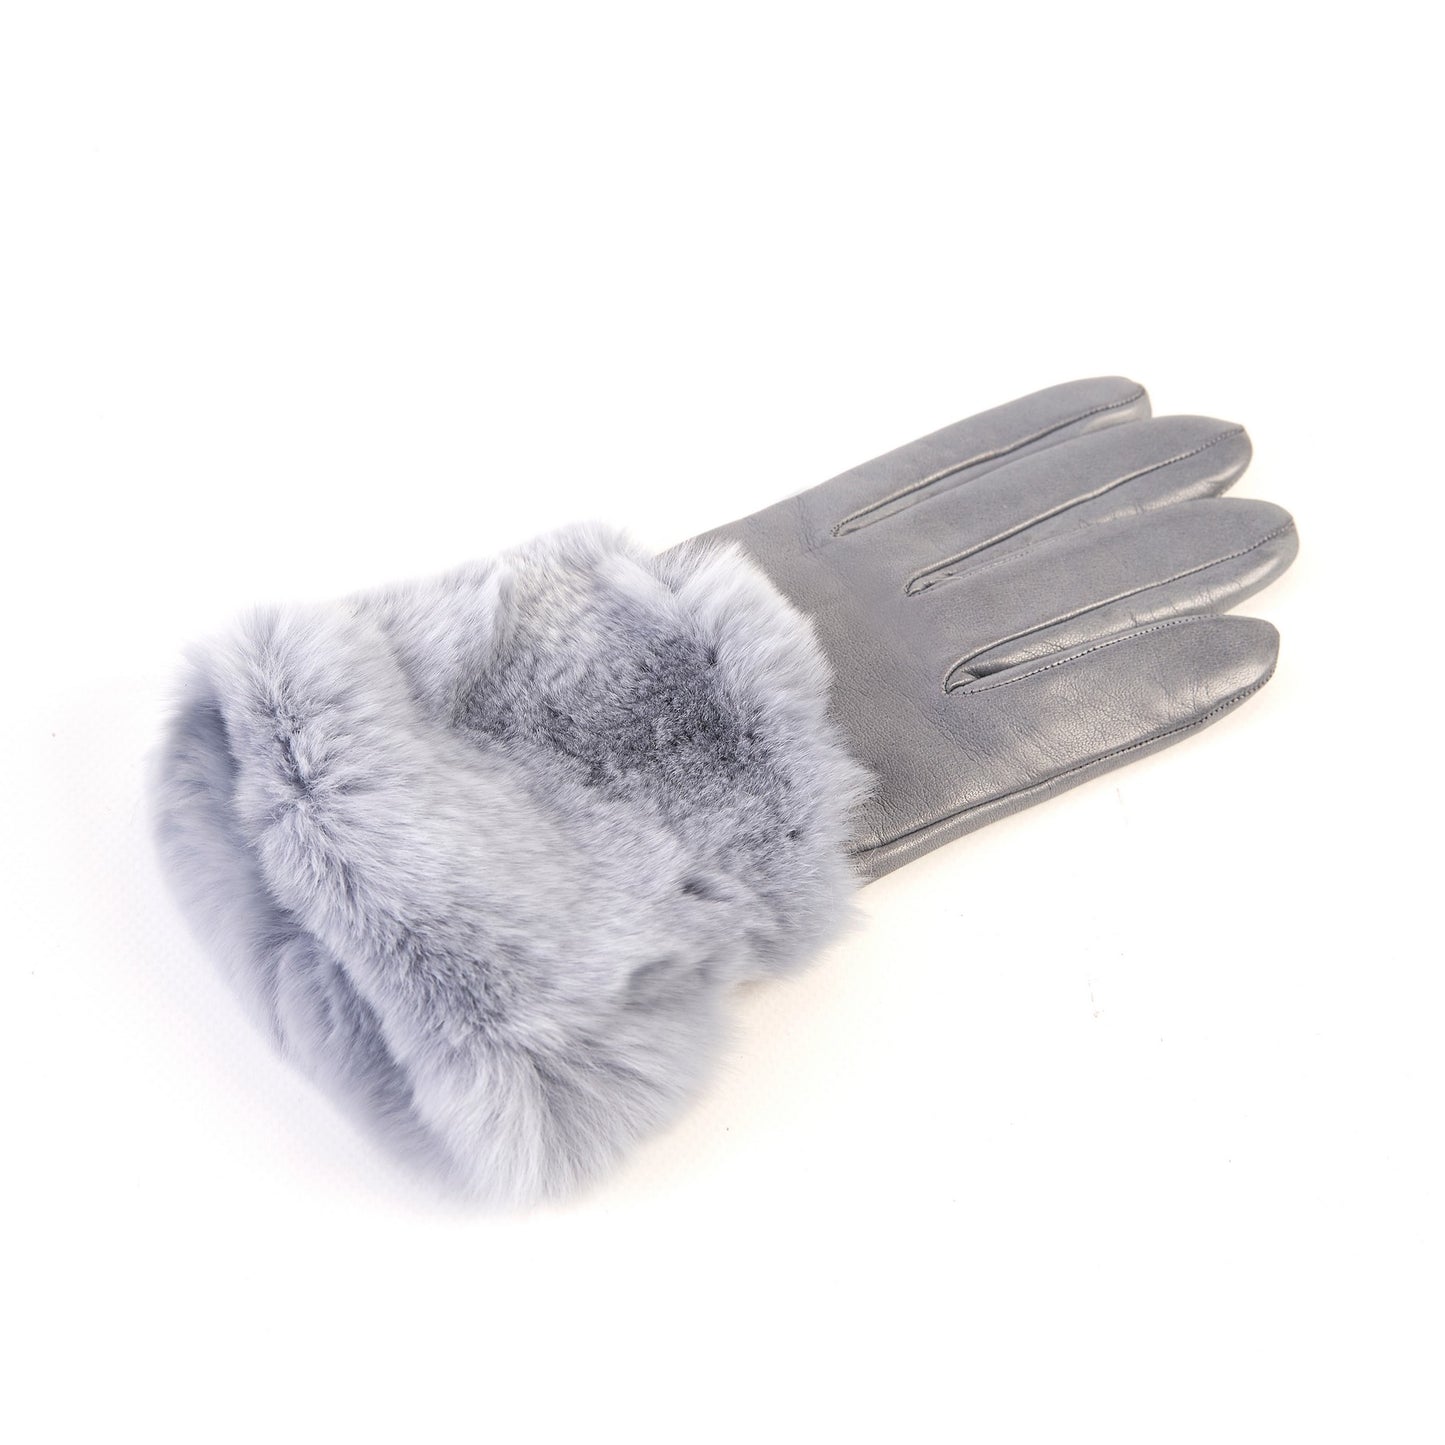 Women's grey nappa leather gloves with a wide real fur panel on the top and cashmere lined